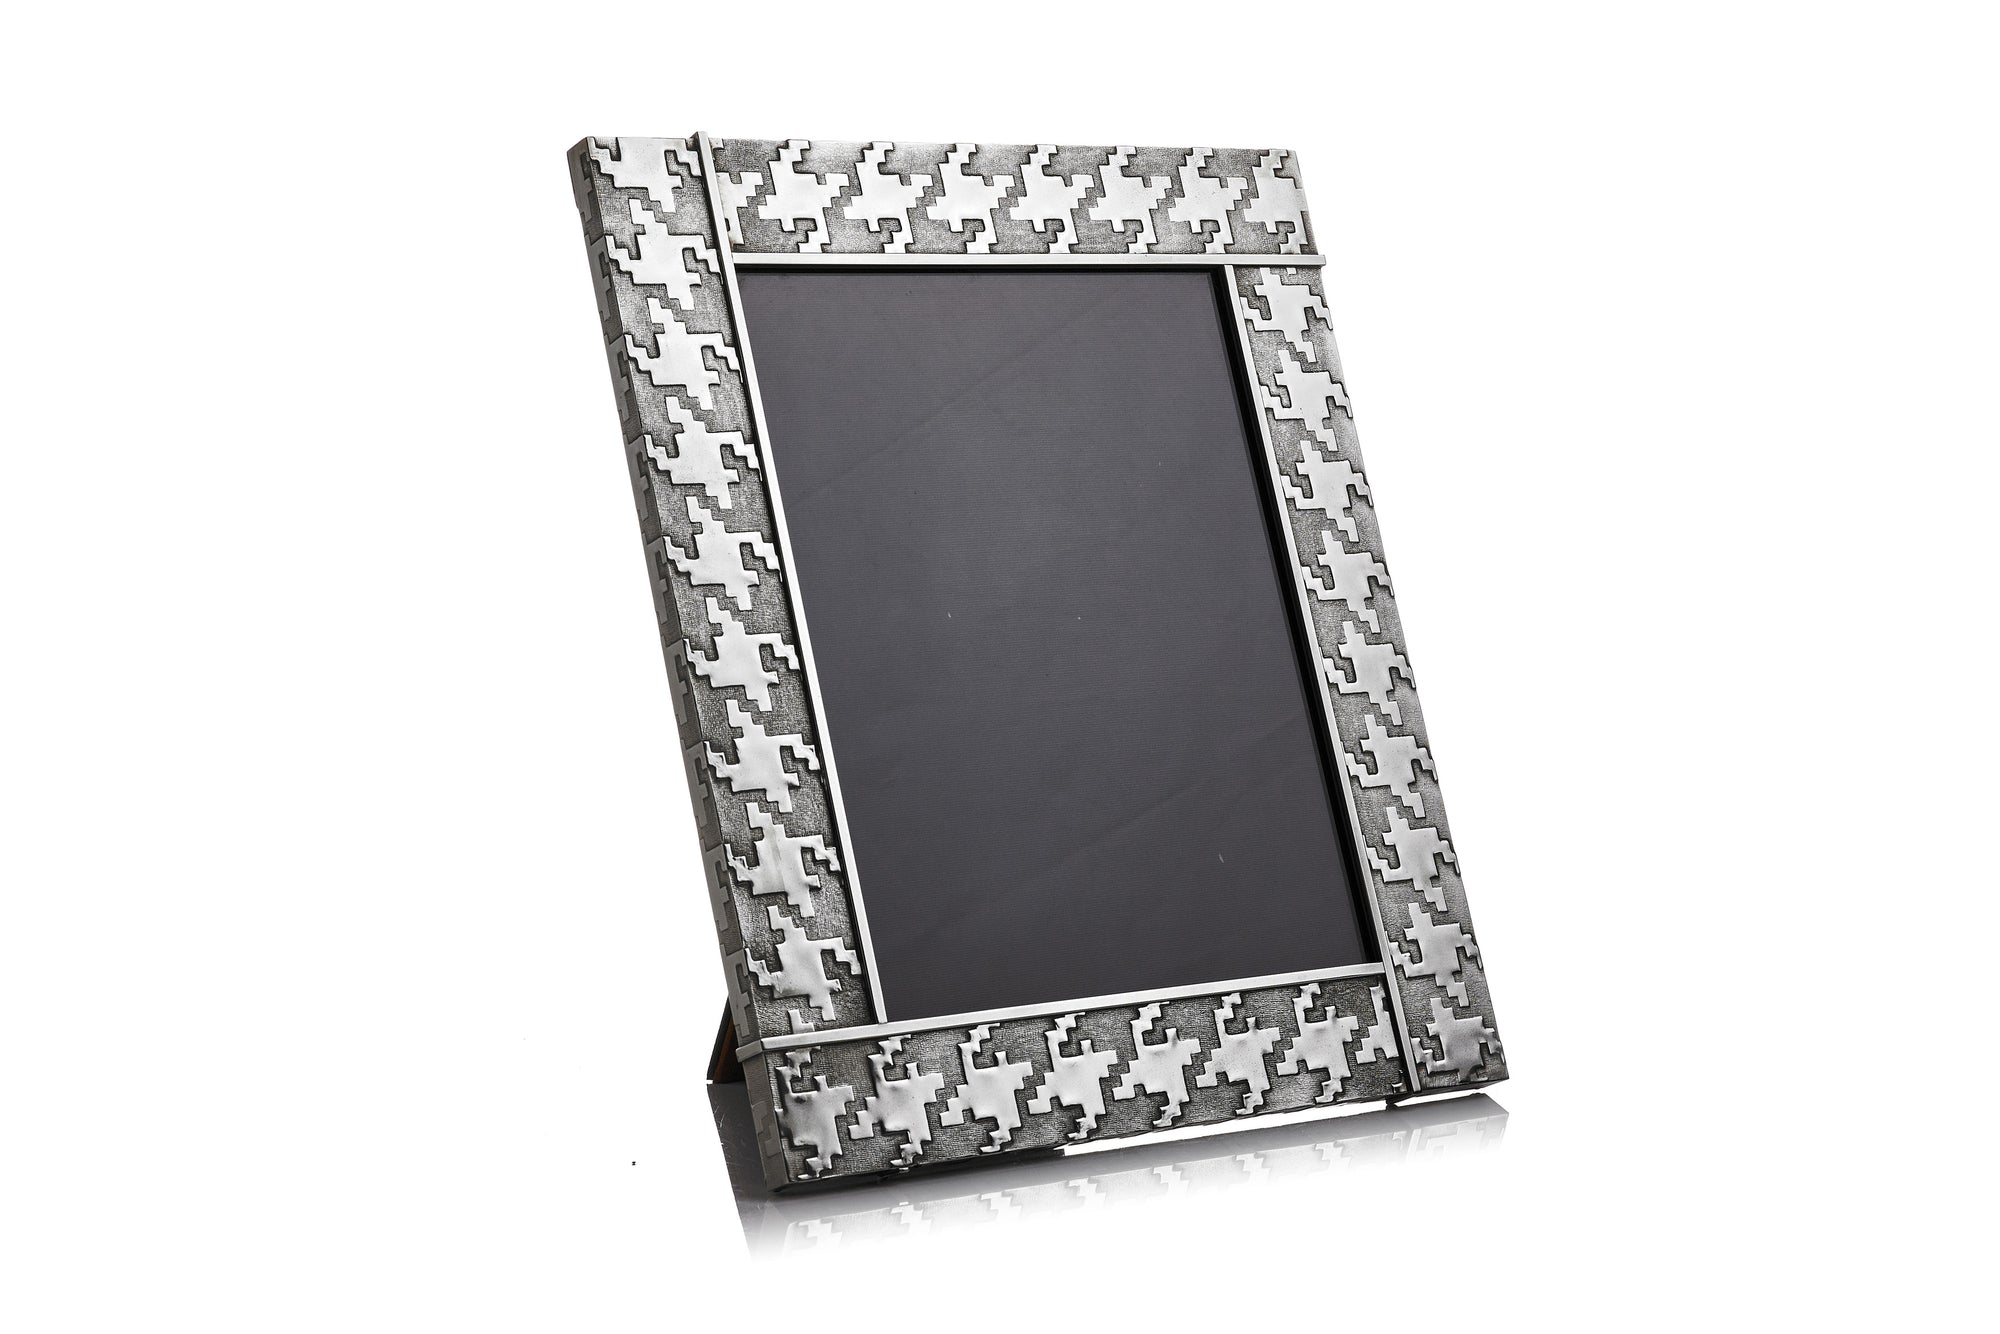 Houndstooth Picture Frame